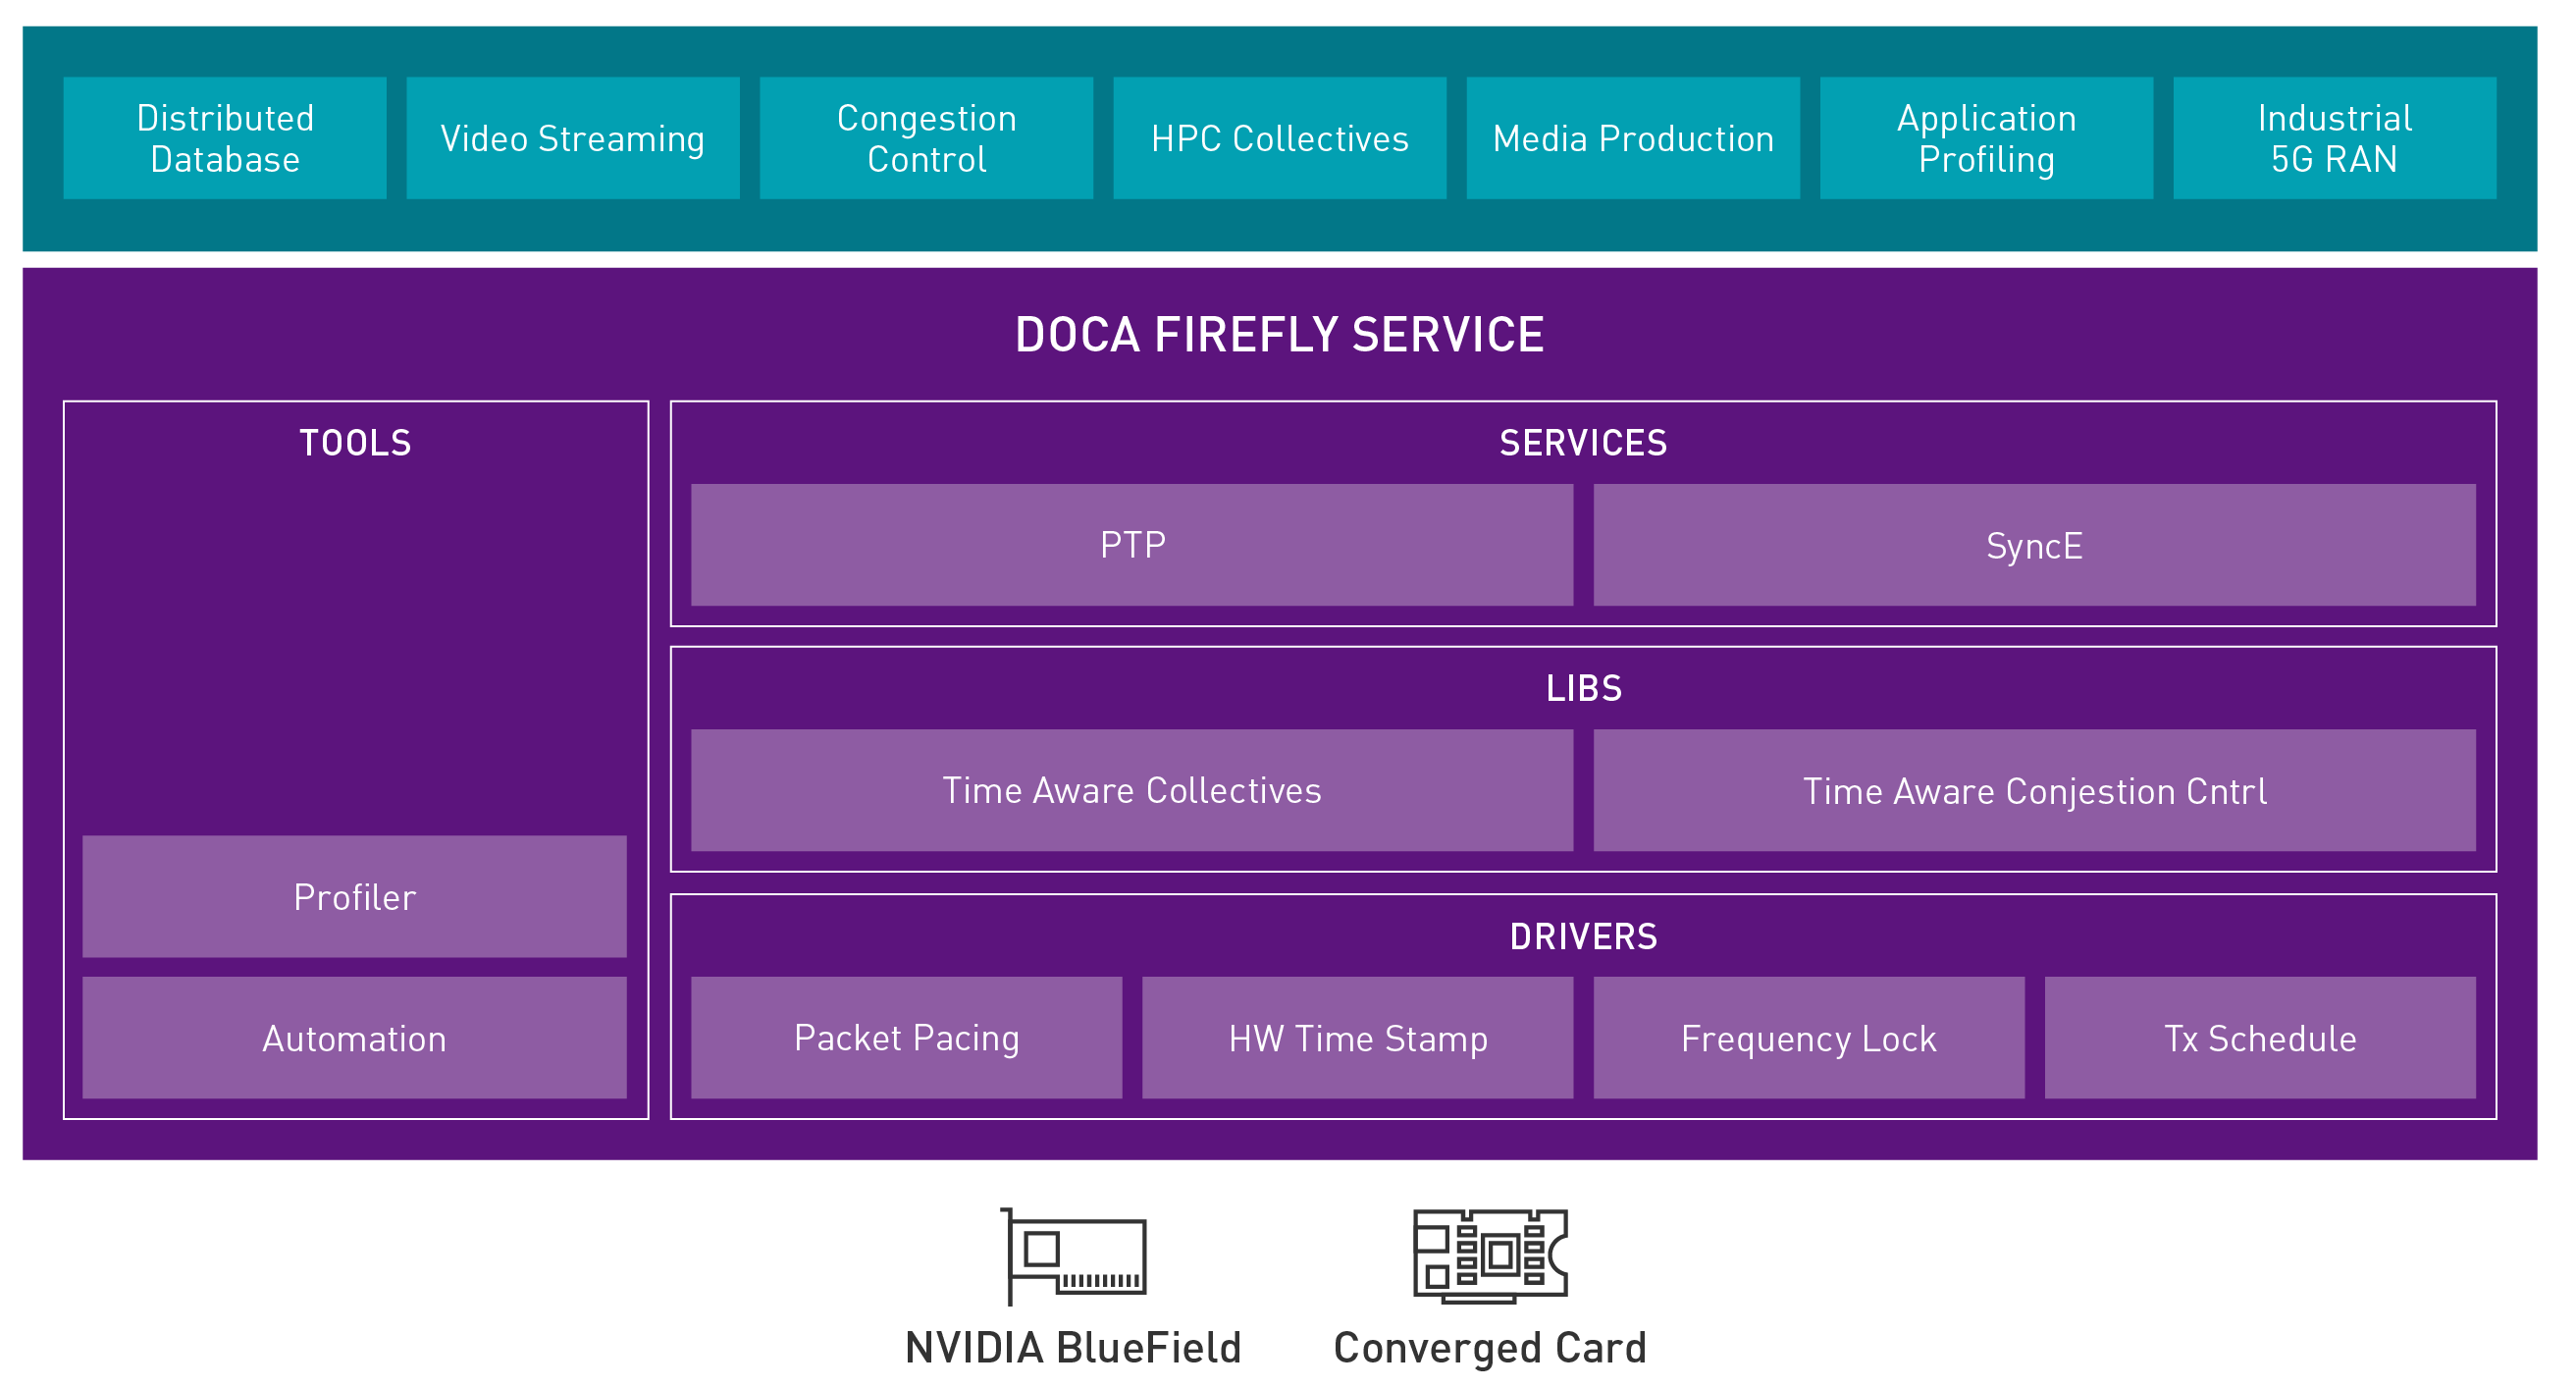 DOCA Firefly tech stack diagram  includes services, tools, LIBs and drivers which support a wide range of use cases. 